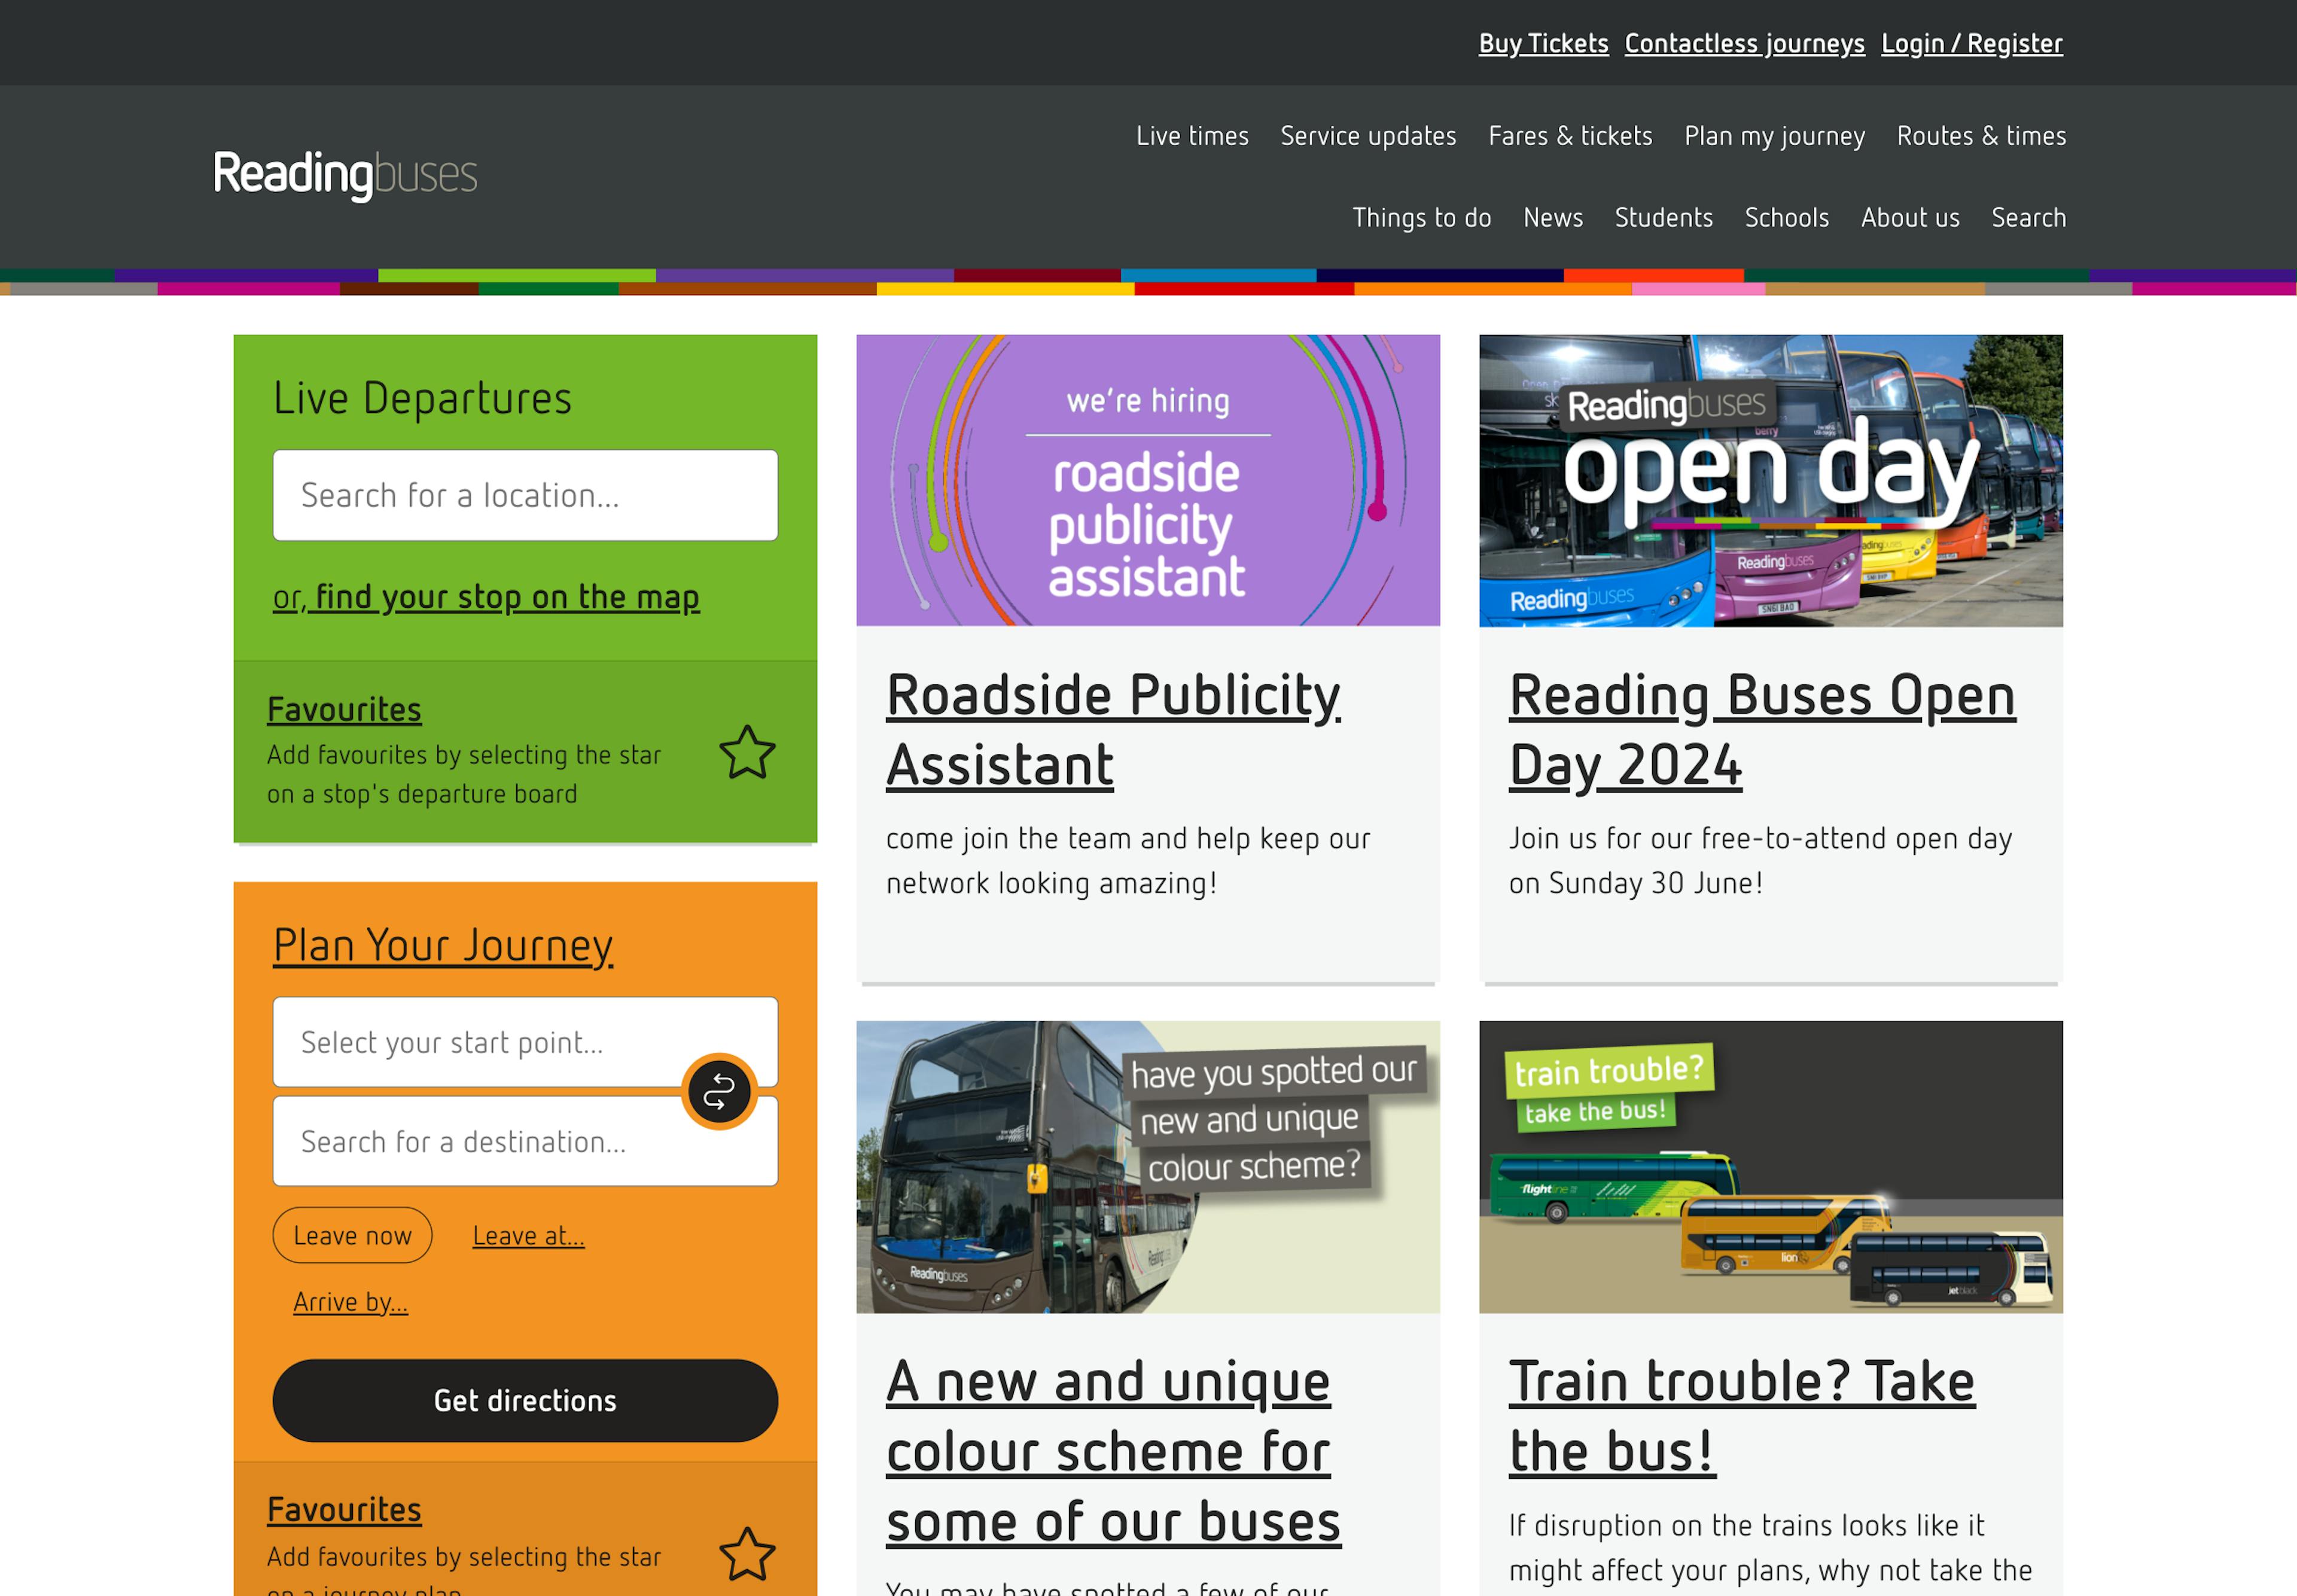 A screenshot of the Reading Buses homepage